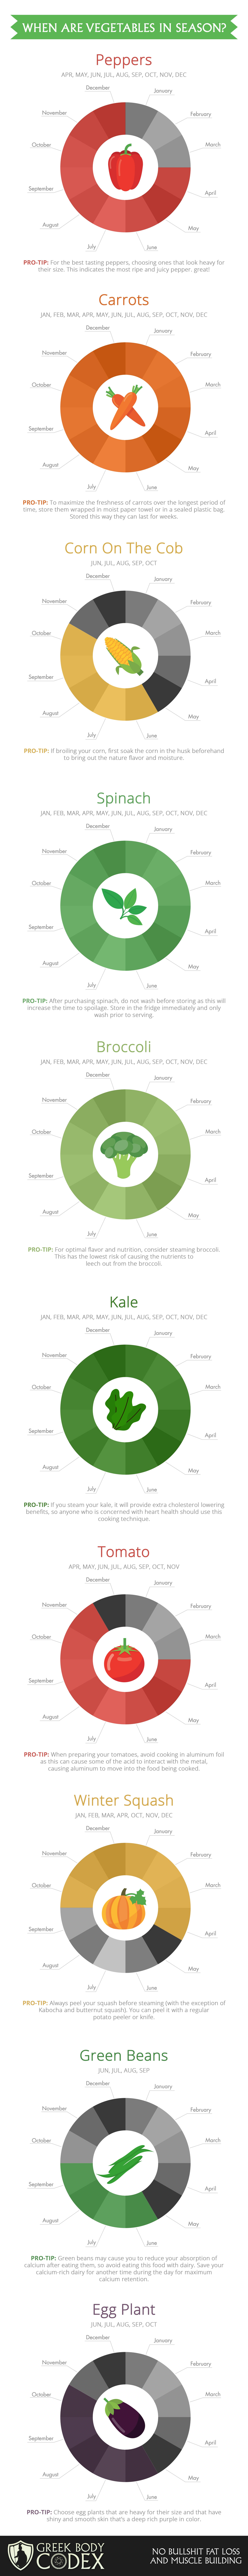 When are vegetables in season - Infographic